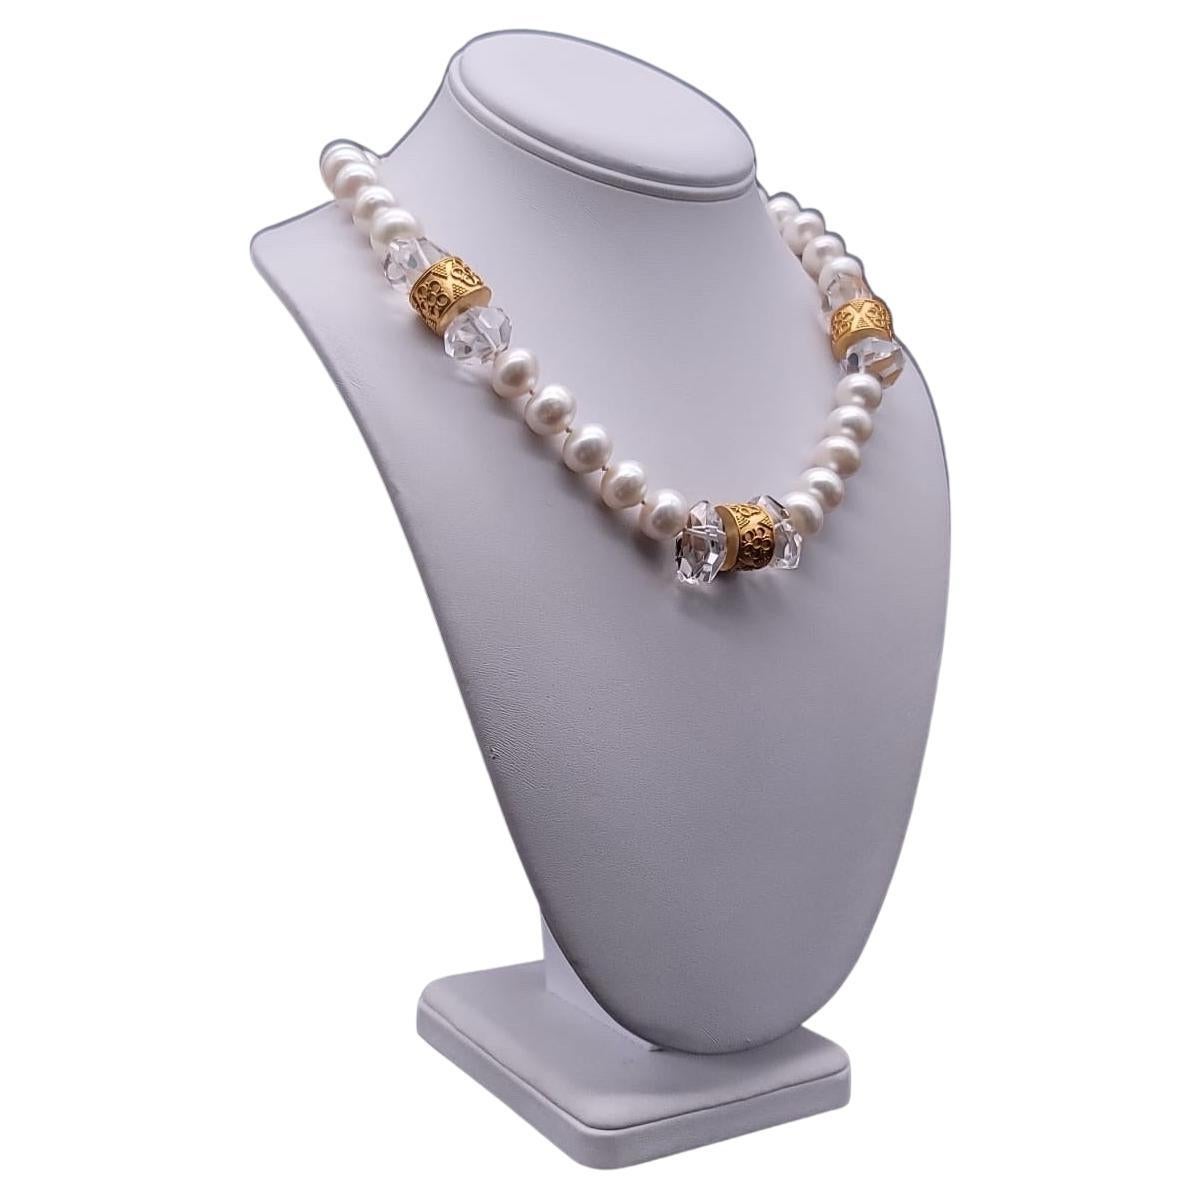 One-of-a-Kind

This elegant necklace features a single strand of 12mm pearls, which are interrupted by three stunning assemblages of cut crystal stones and 3/8